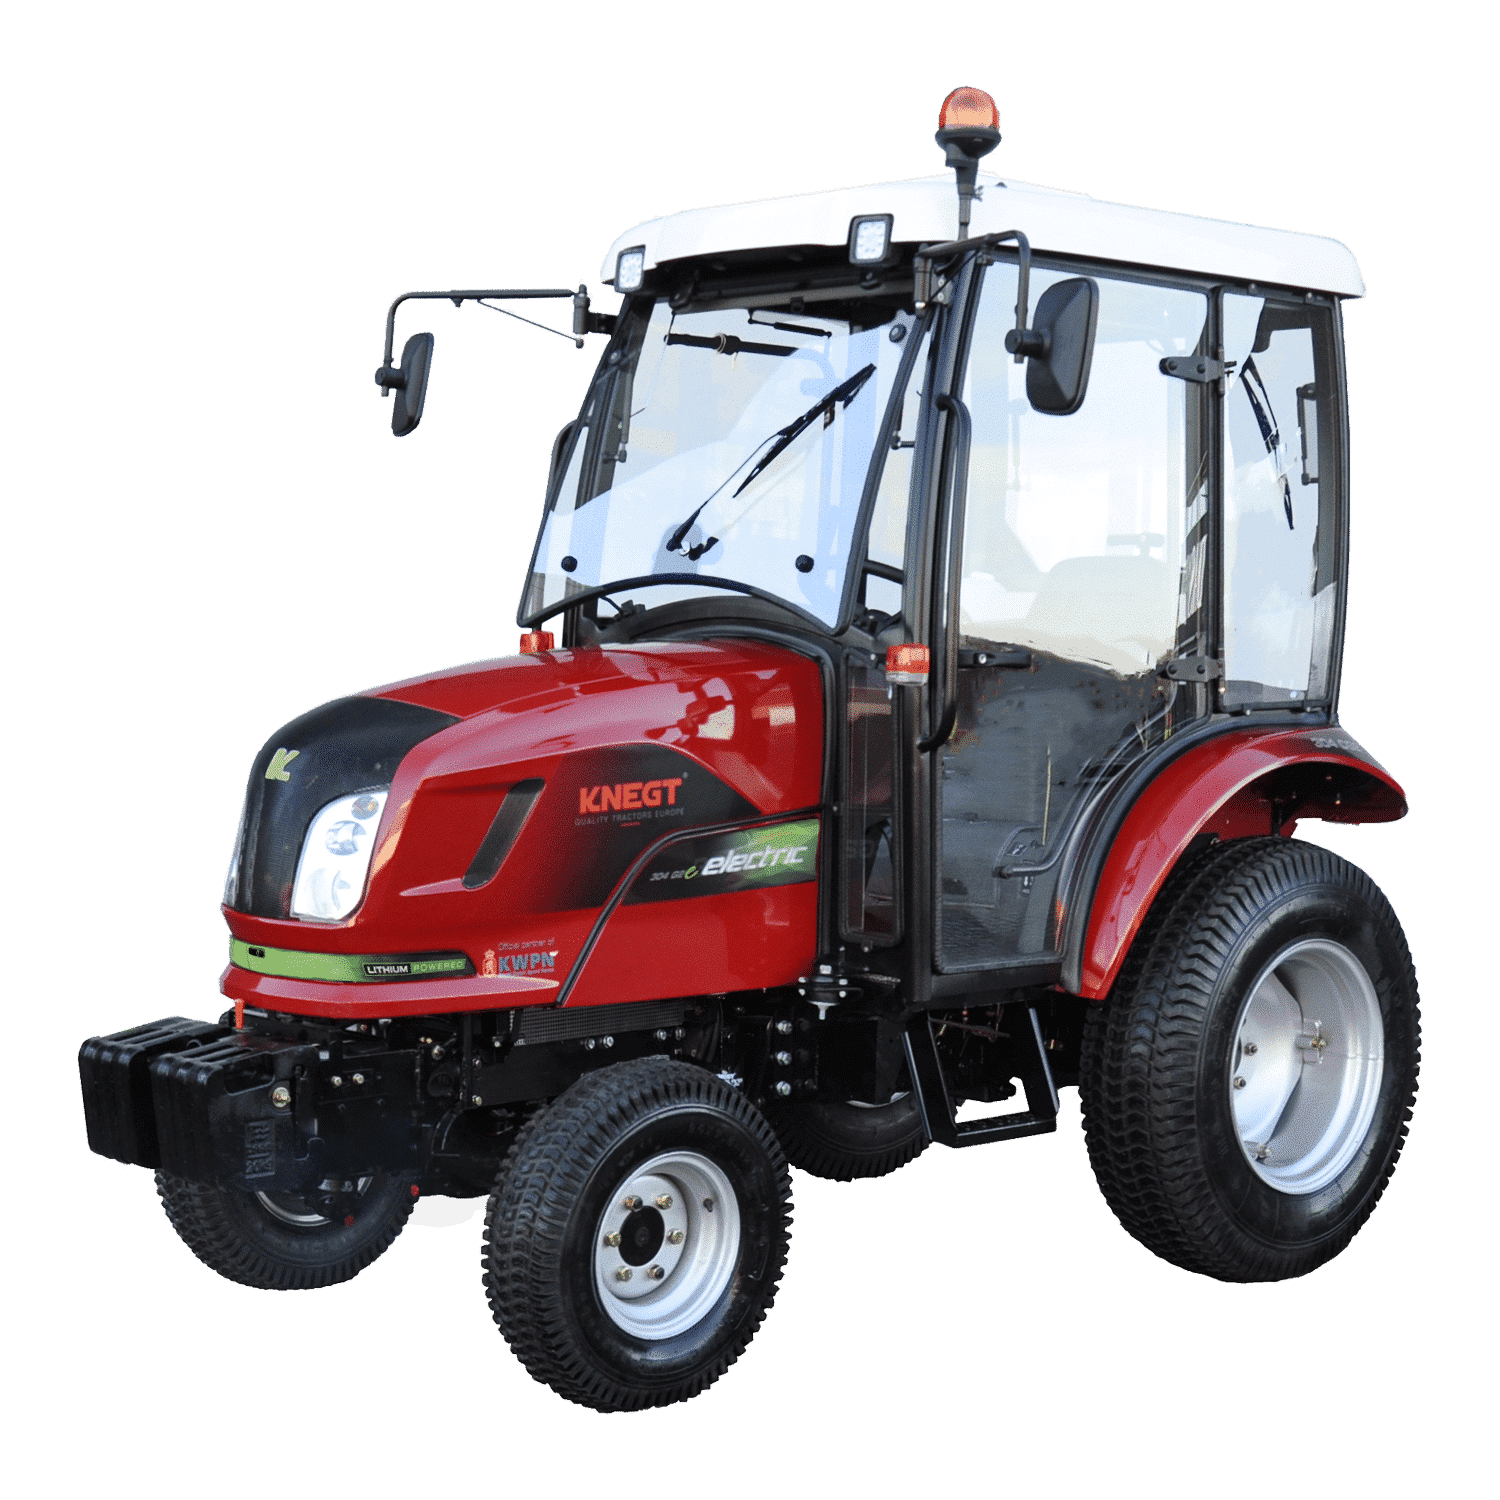 knegt_compact_tractor_productfoto_cabine_304G2E